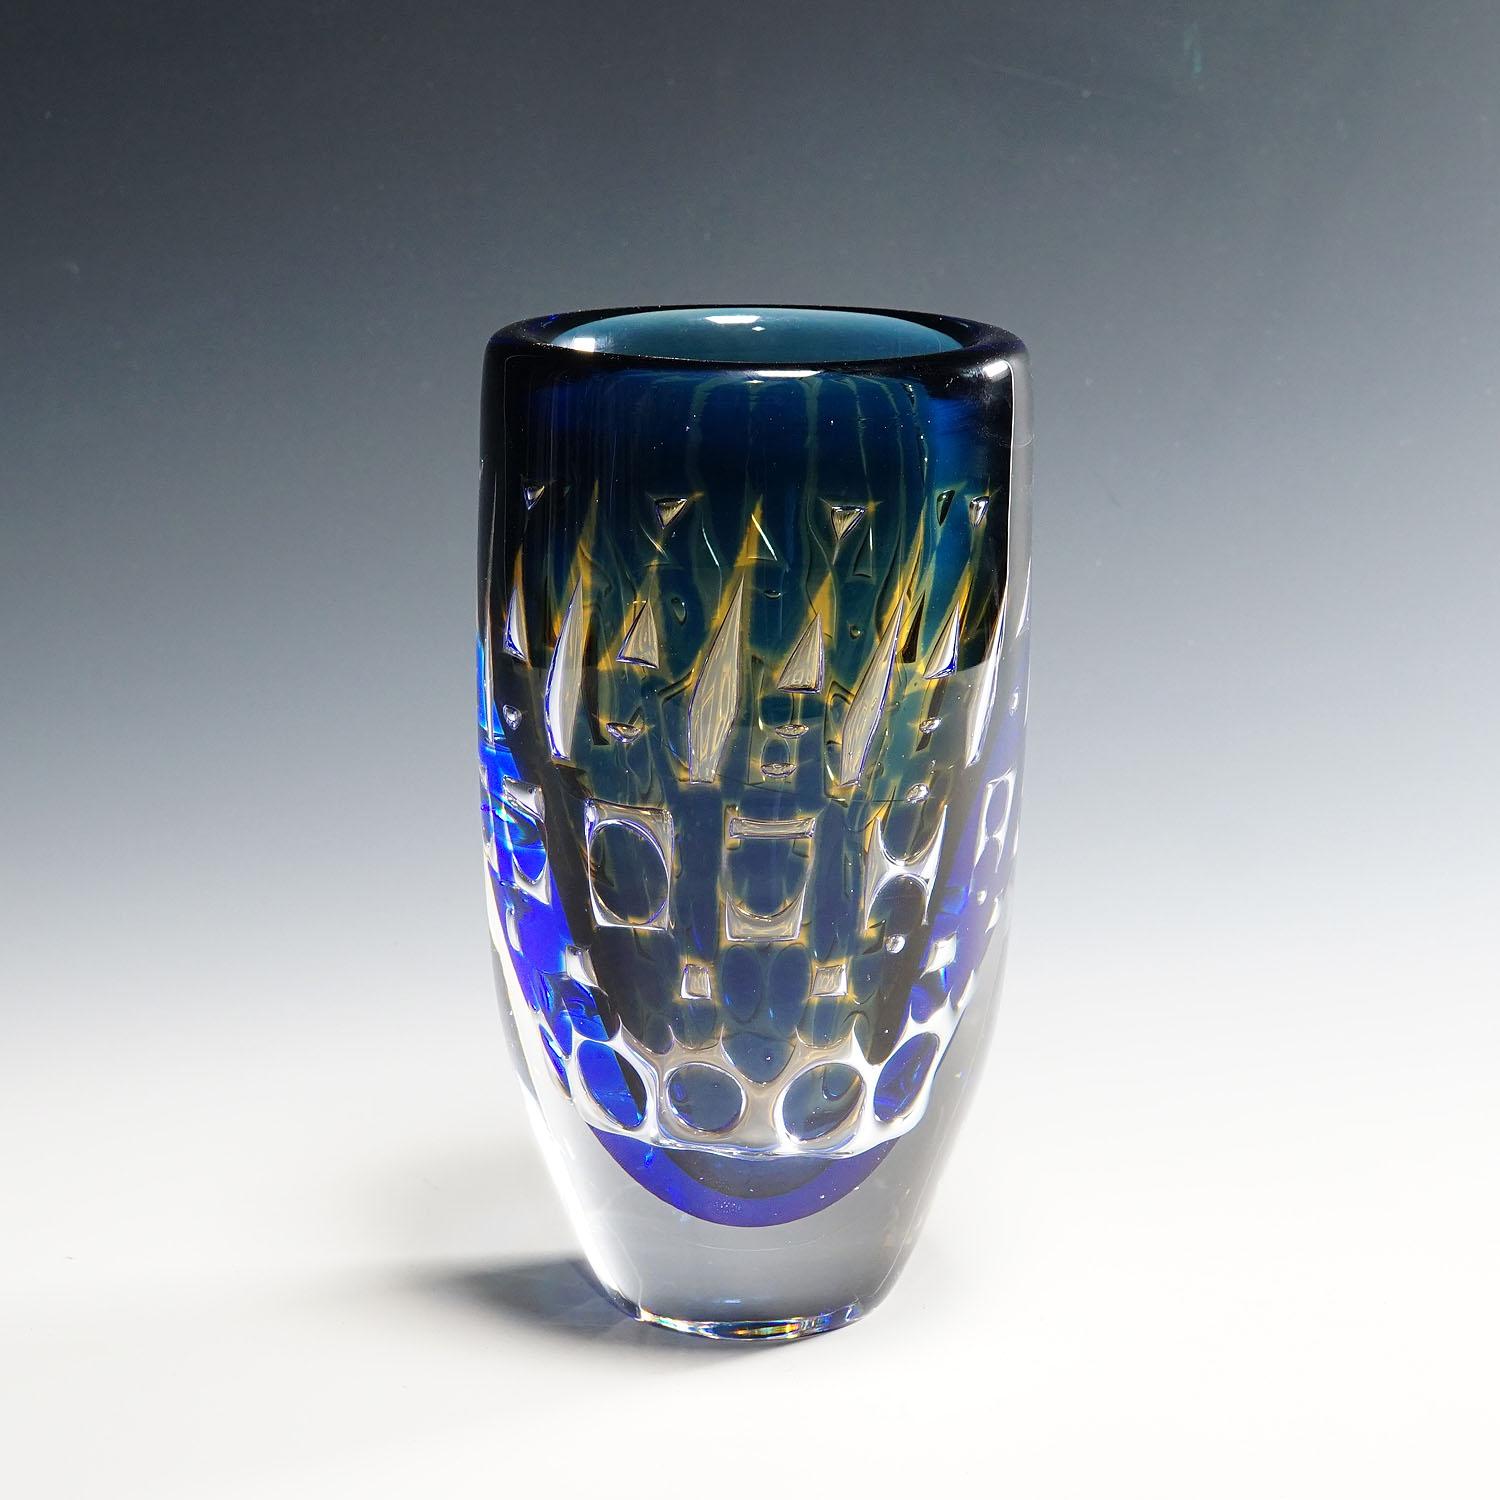 Ariel Vase by Ingeborg Lundin for Orrefors, Sweden.

A heavy vase of the Orrefors Ariel series designed by Ingeborg Lundin, Sweden ca. 1950s. Colorless glass with a blue overlay, cooled, sandblasted with a geometrical pattern, re-heated and cased